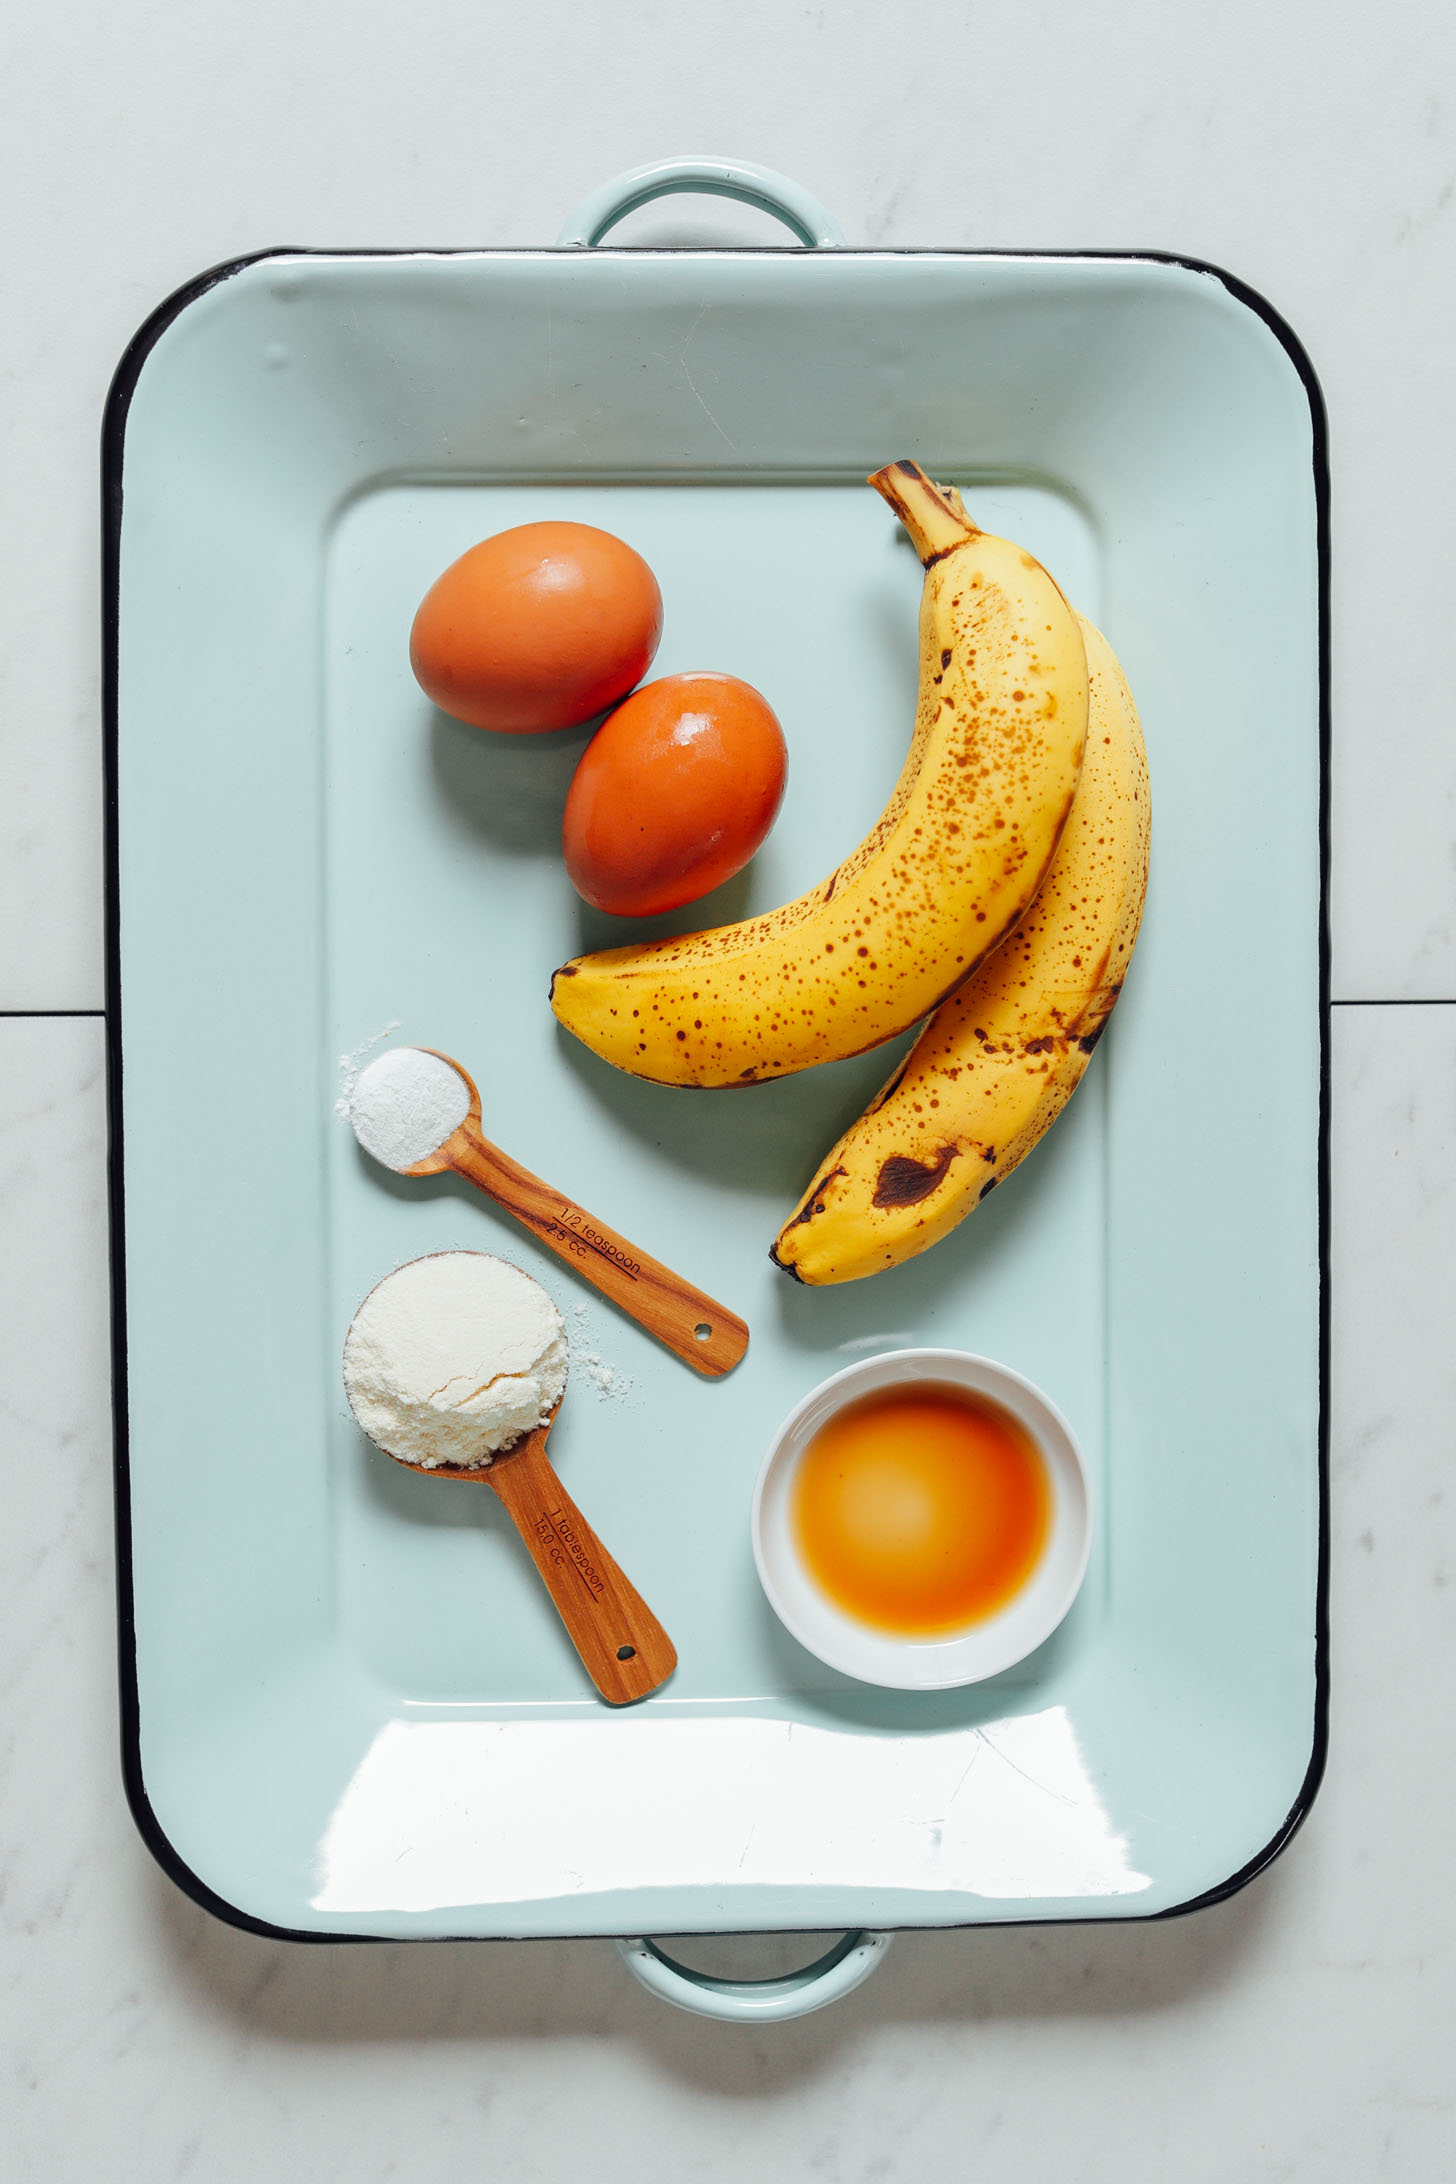 Tray with 5 simple ingredients for making Banana Egg Pancakes